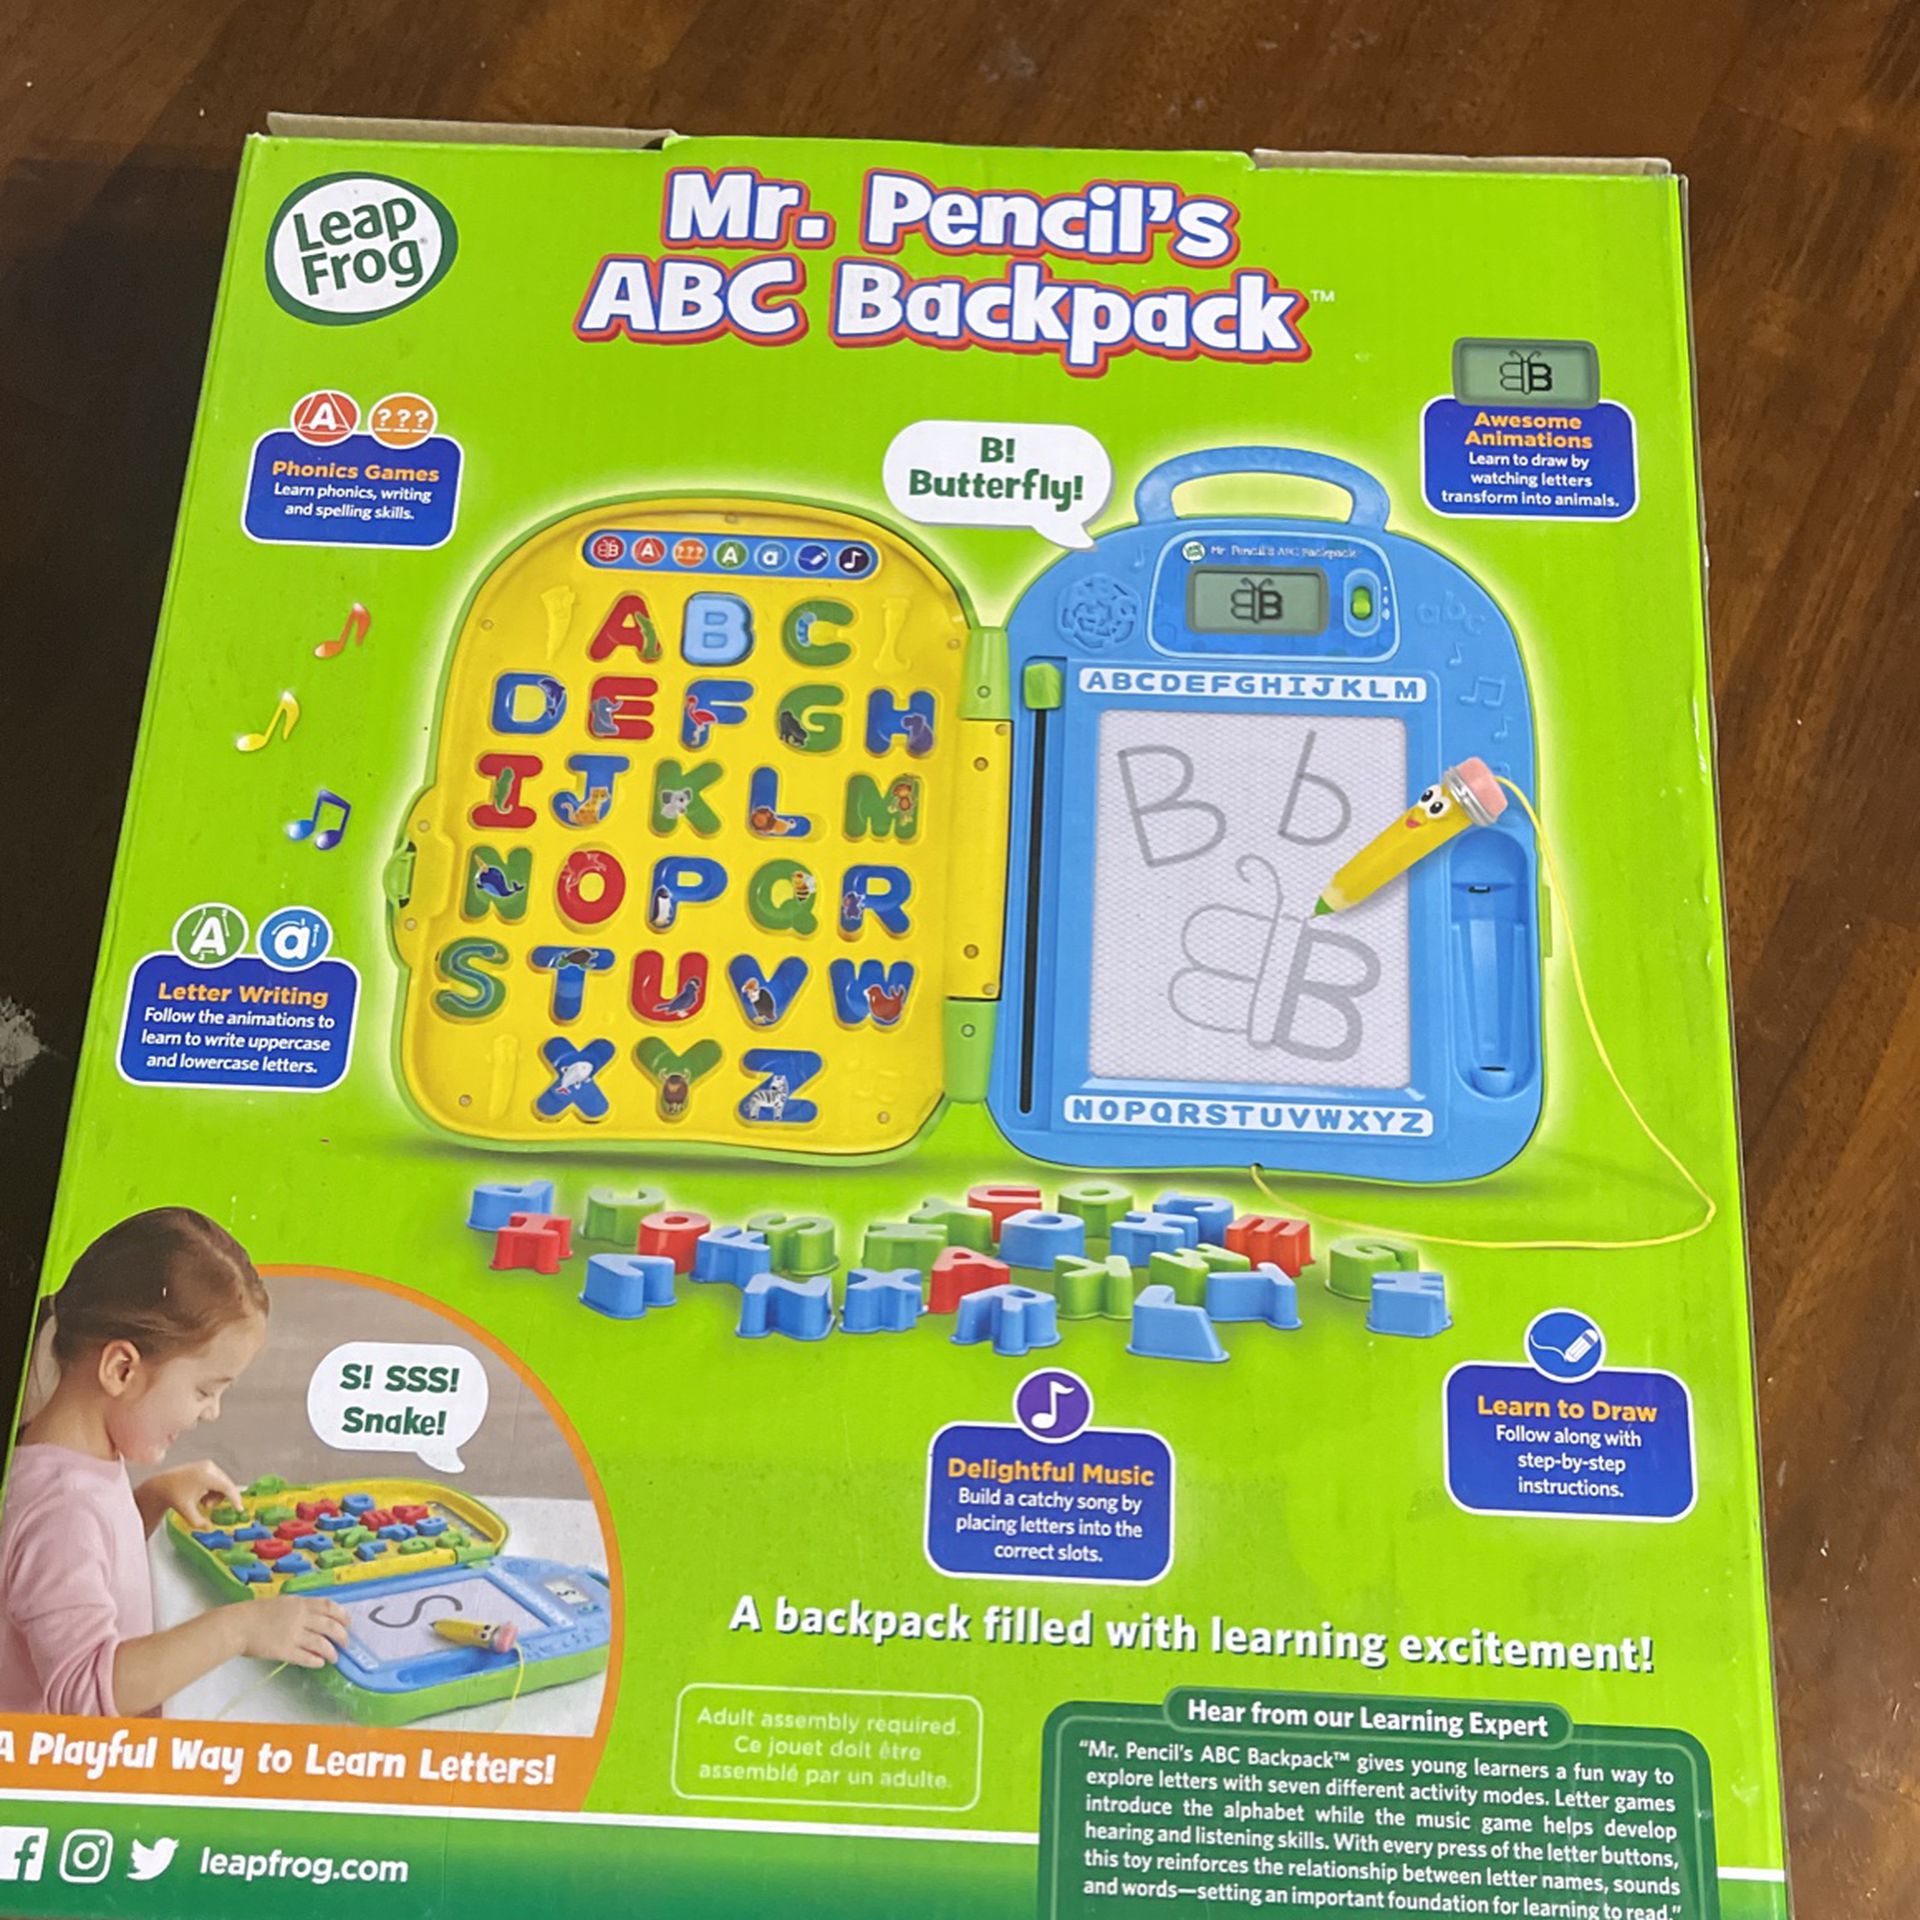 Me Pencil’s ABC Backpack